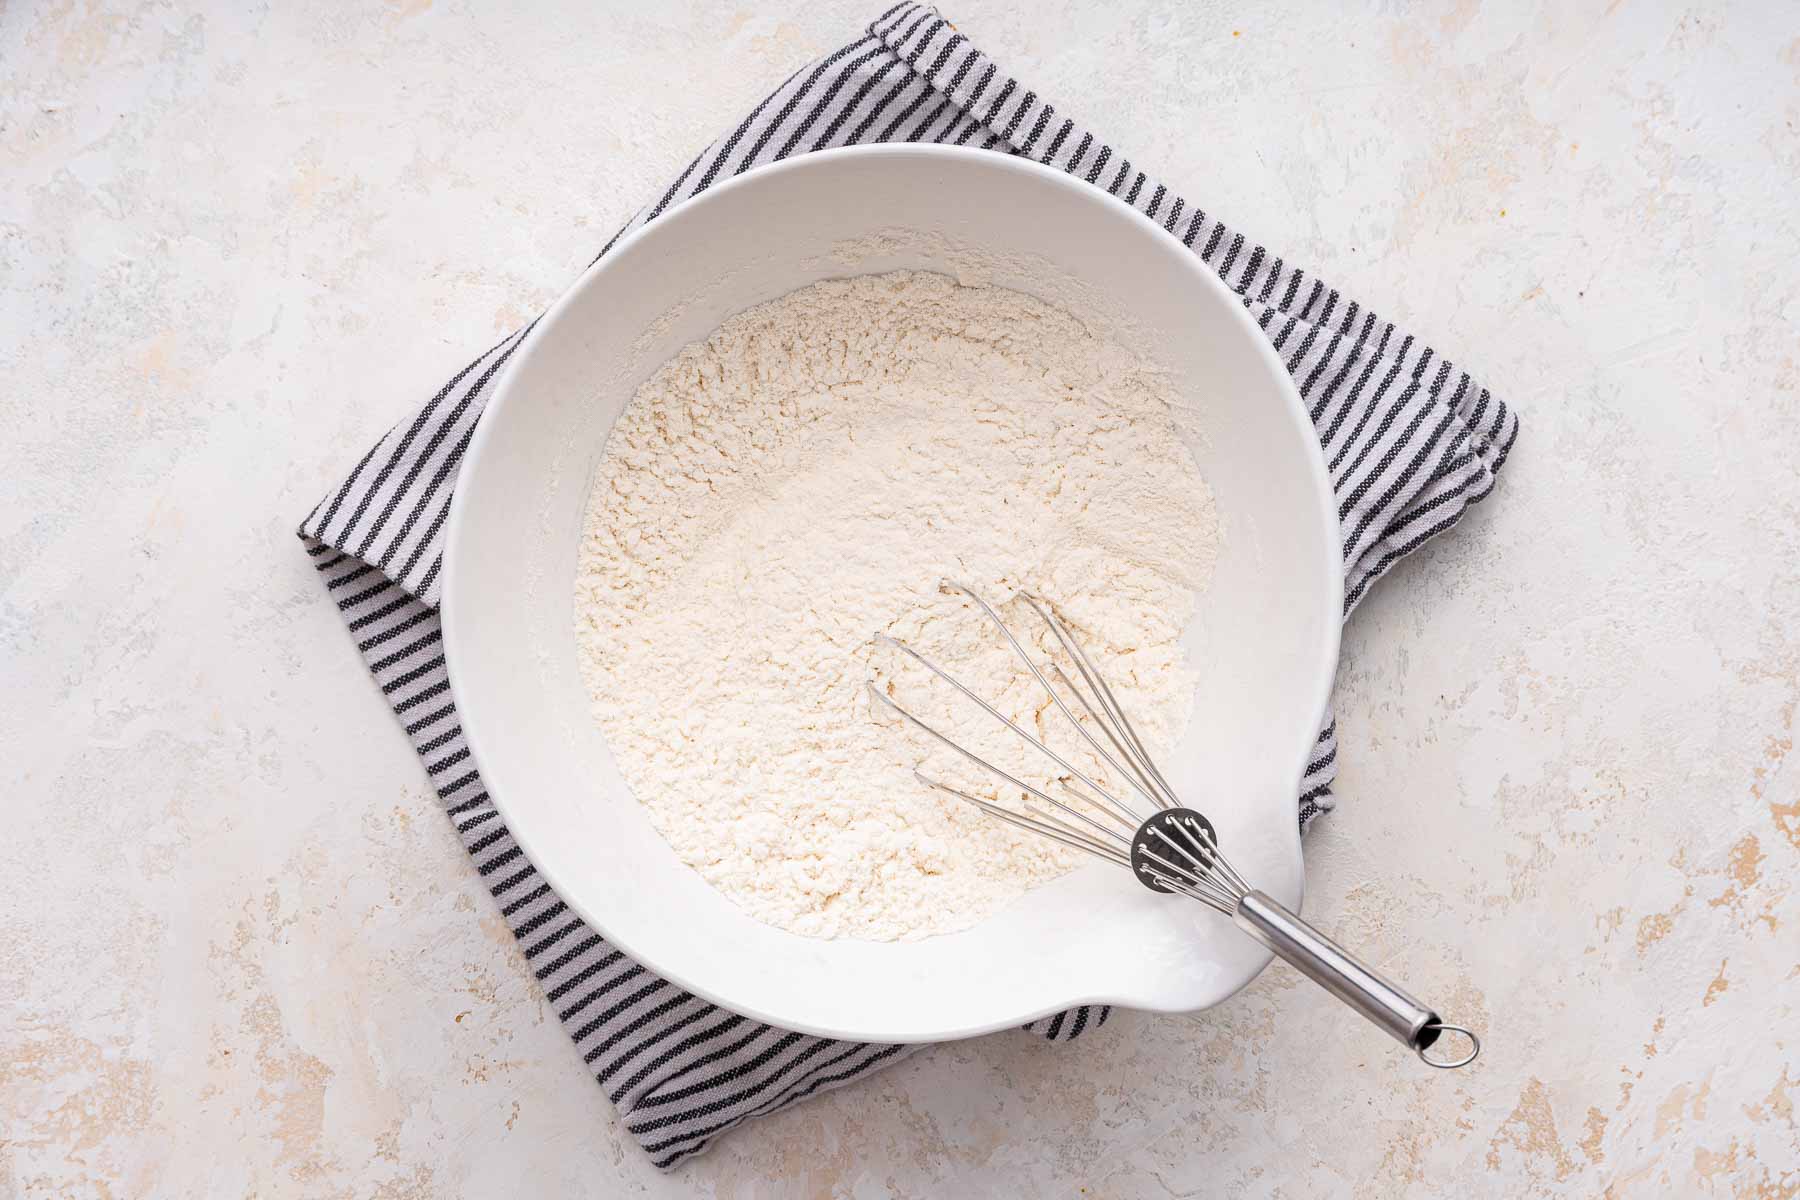 Flour, baking soda and salt whisked in a white bowl.